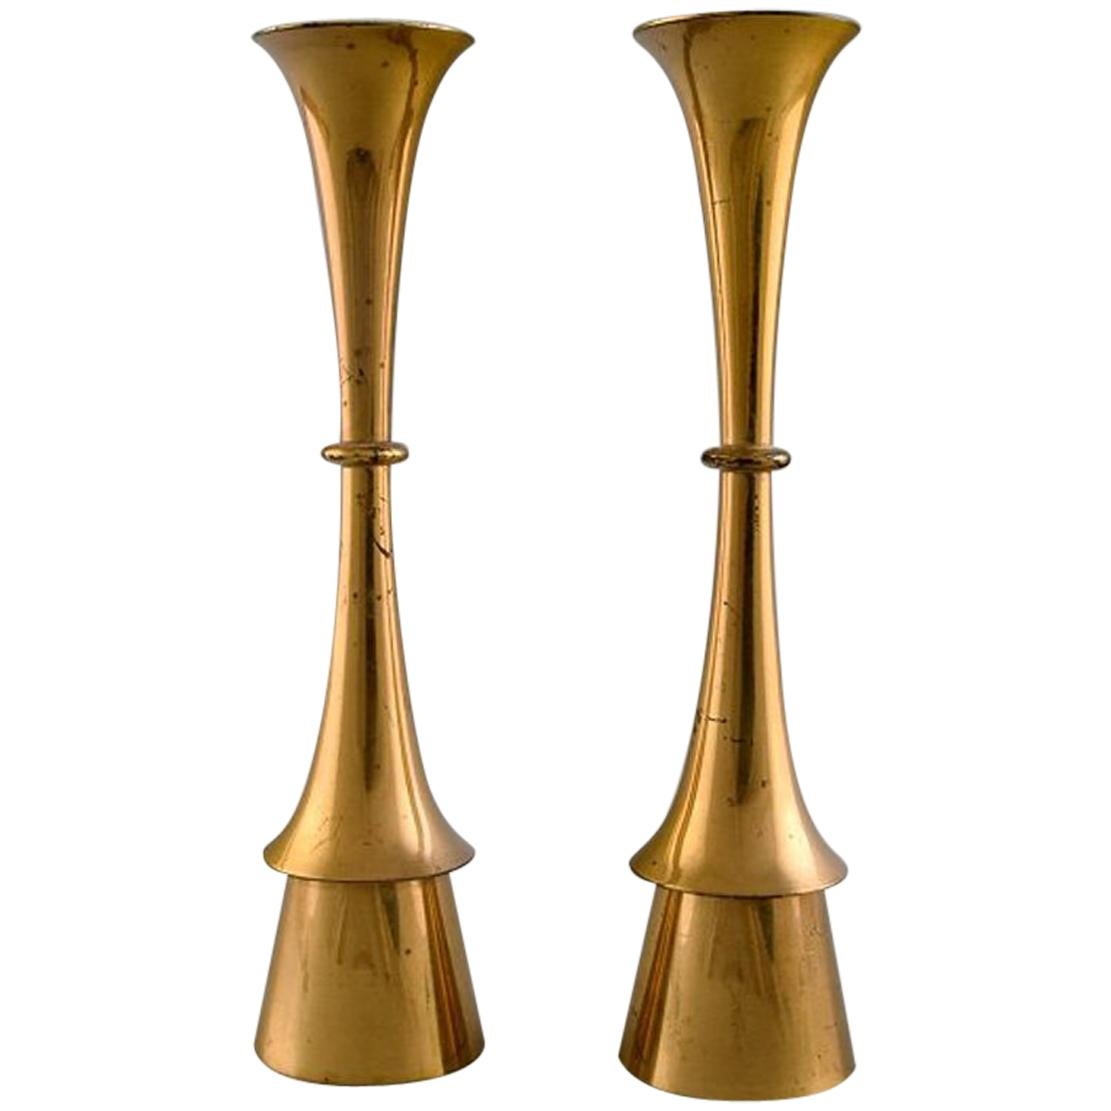 Jens Quistgaard Style of Danish Design, 1960s a Pair of Candlesticks in Brass